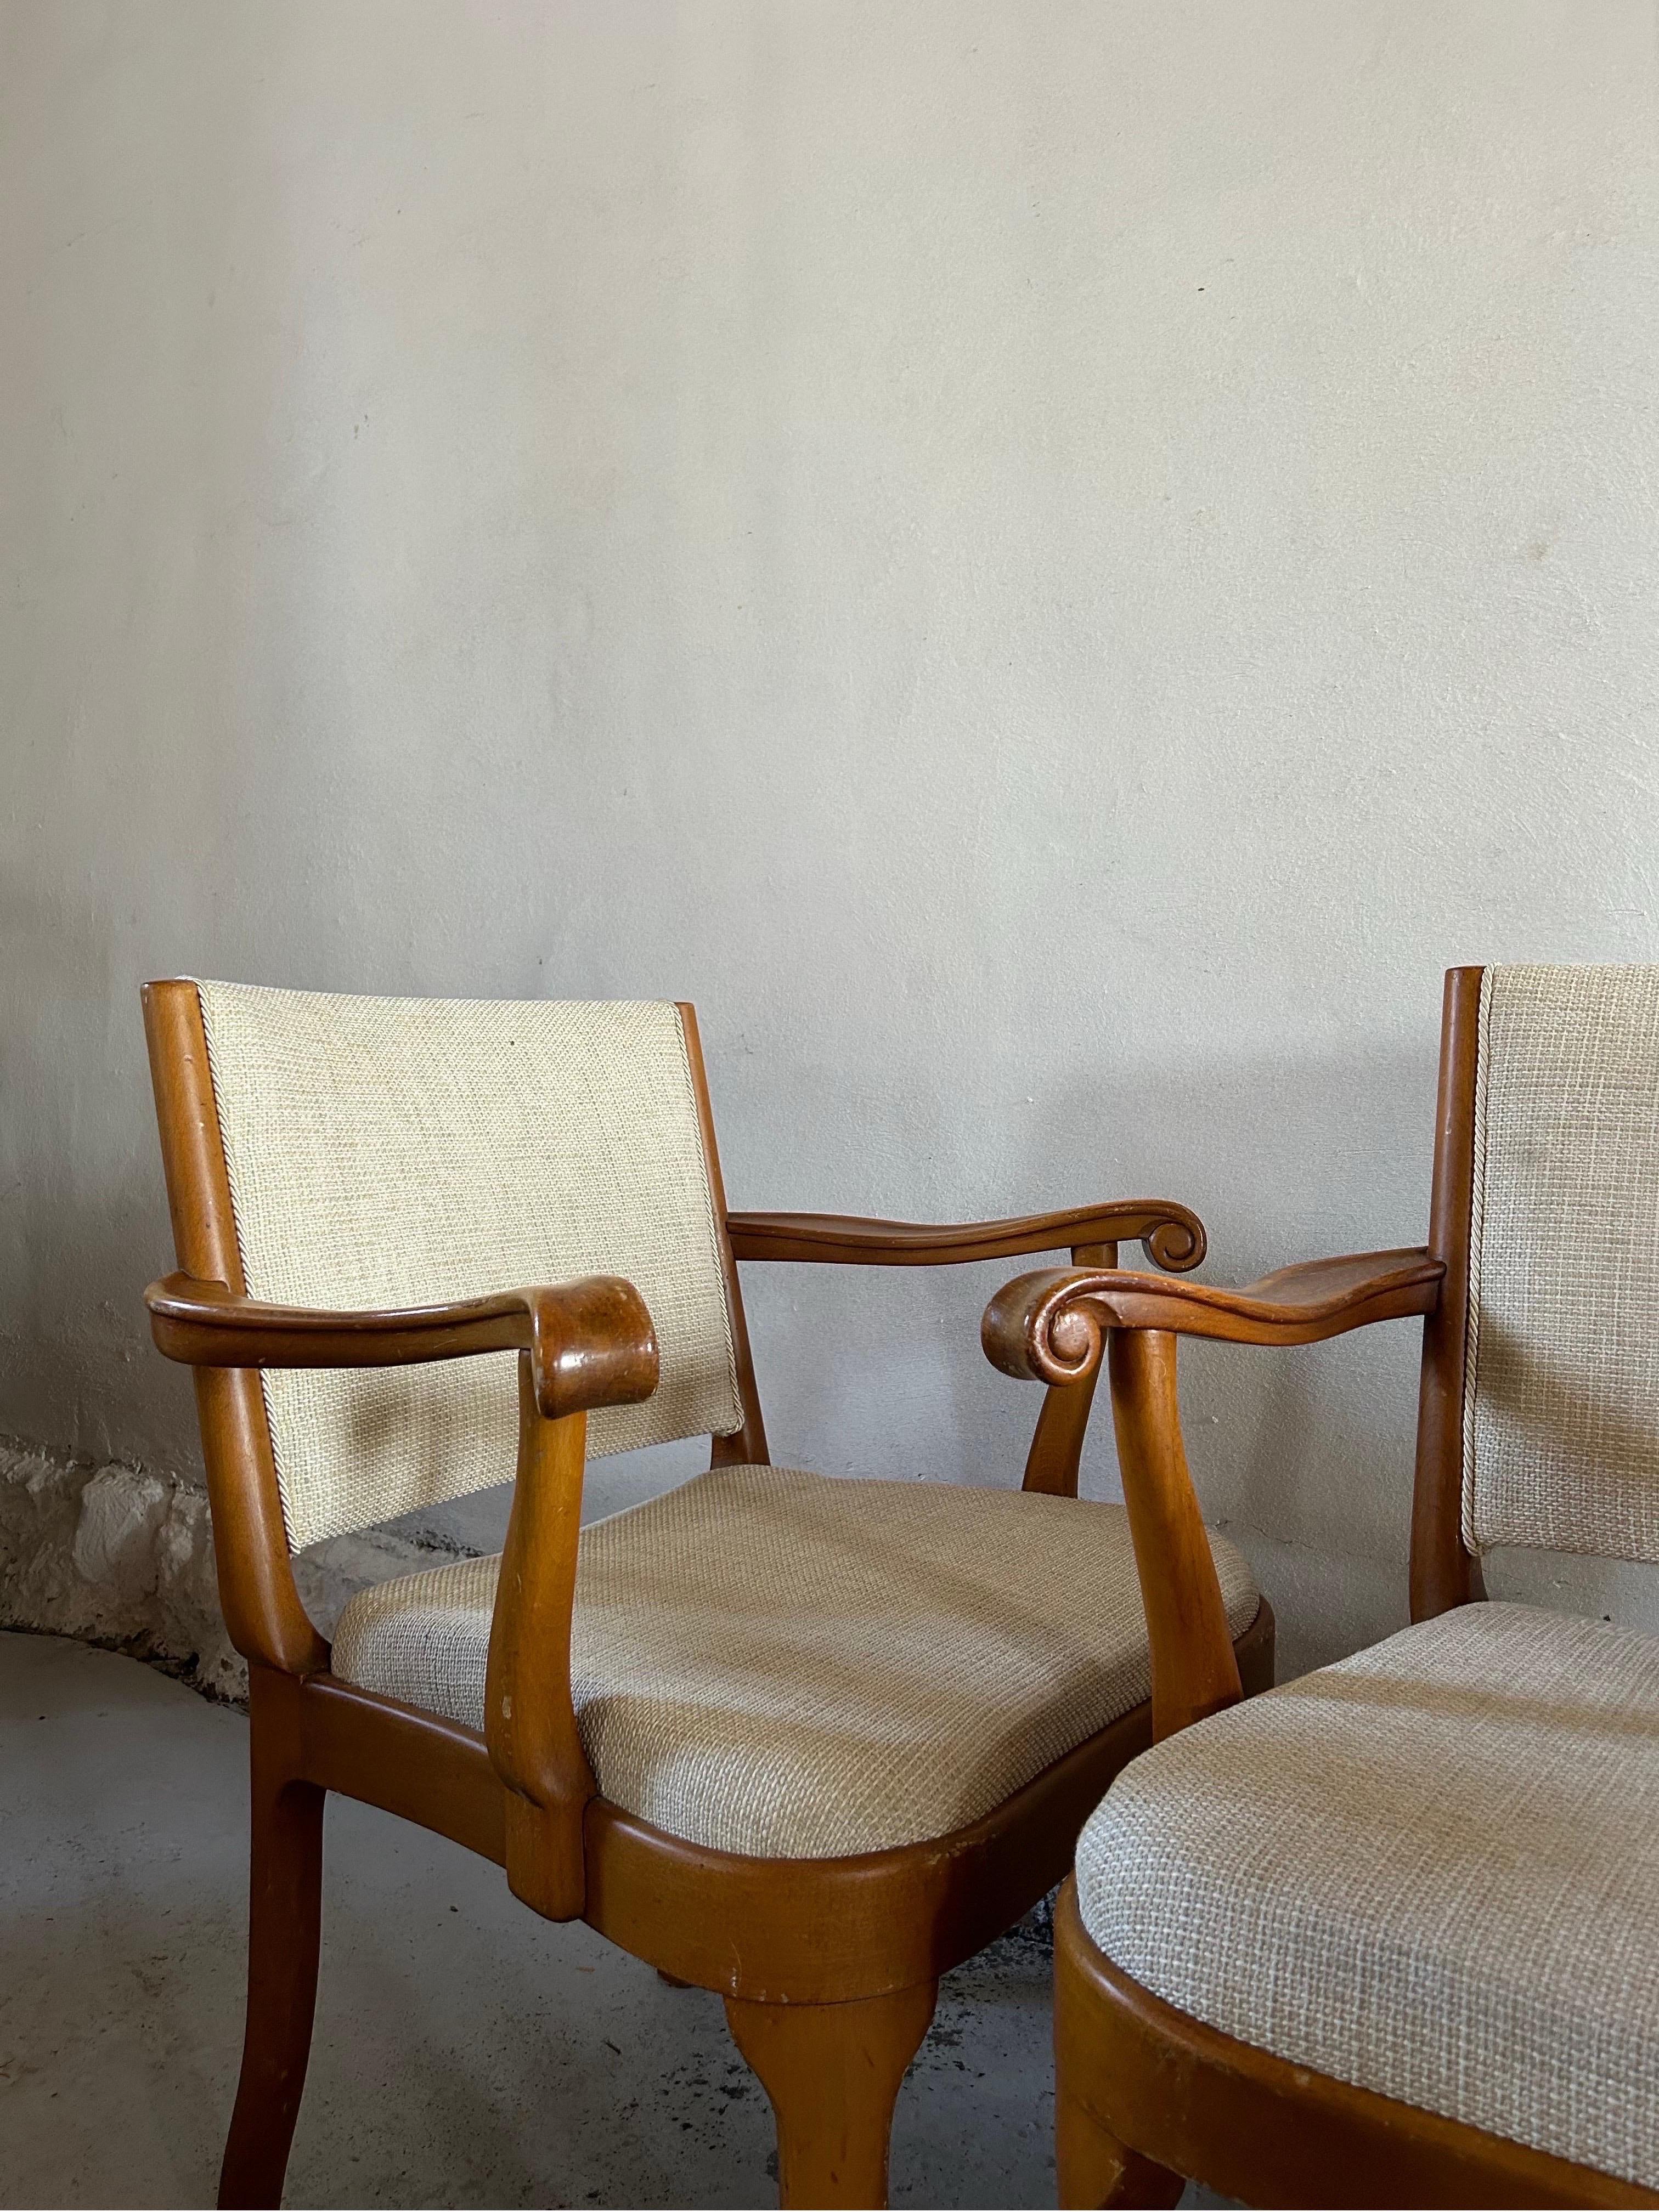 Danish Pair of Arts and Crafts Armchairs by Thorvald Jørgensen for Fritz Hansen 1910’s For Sale